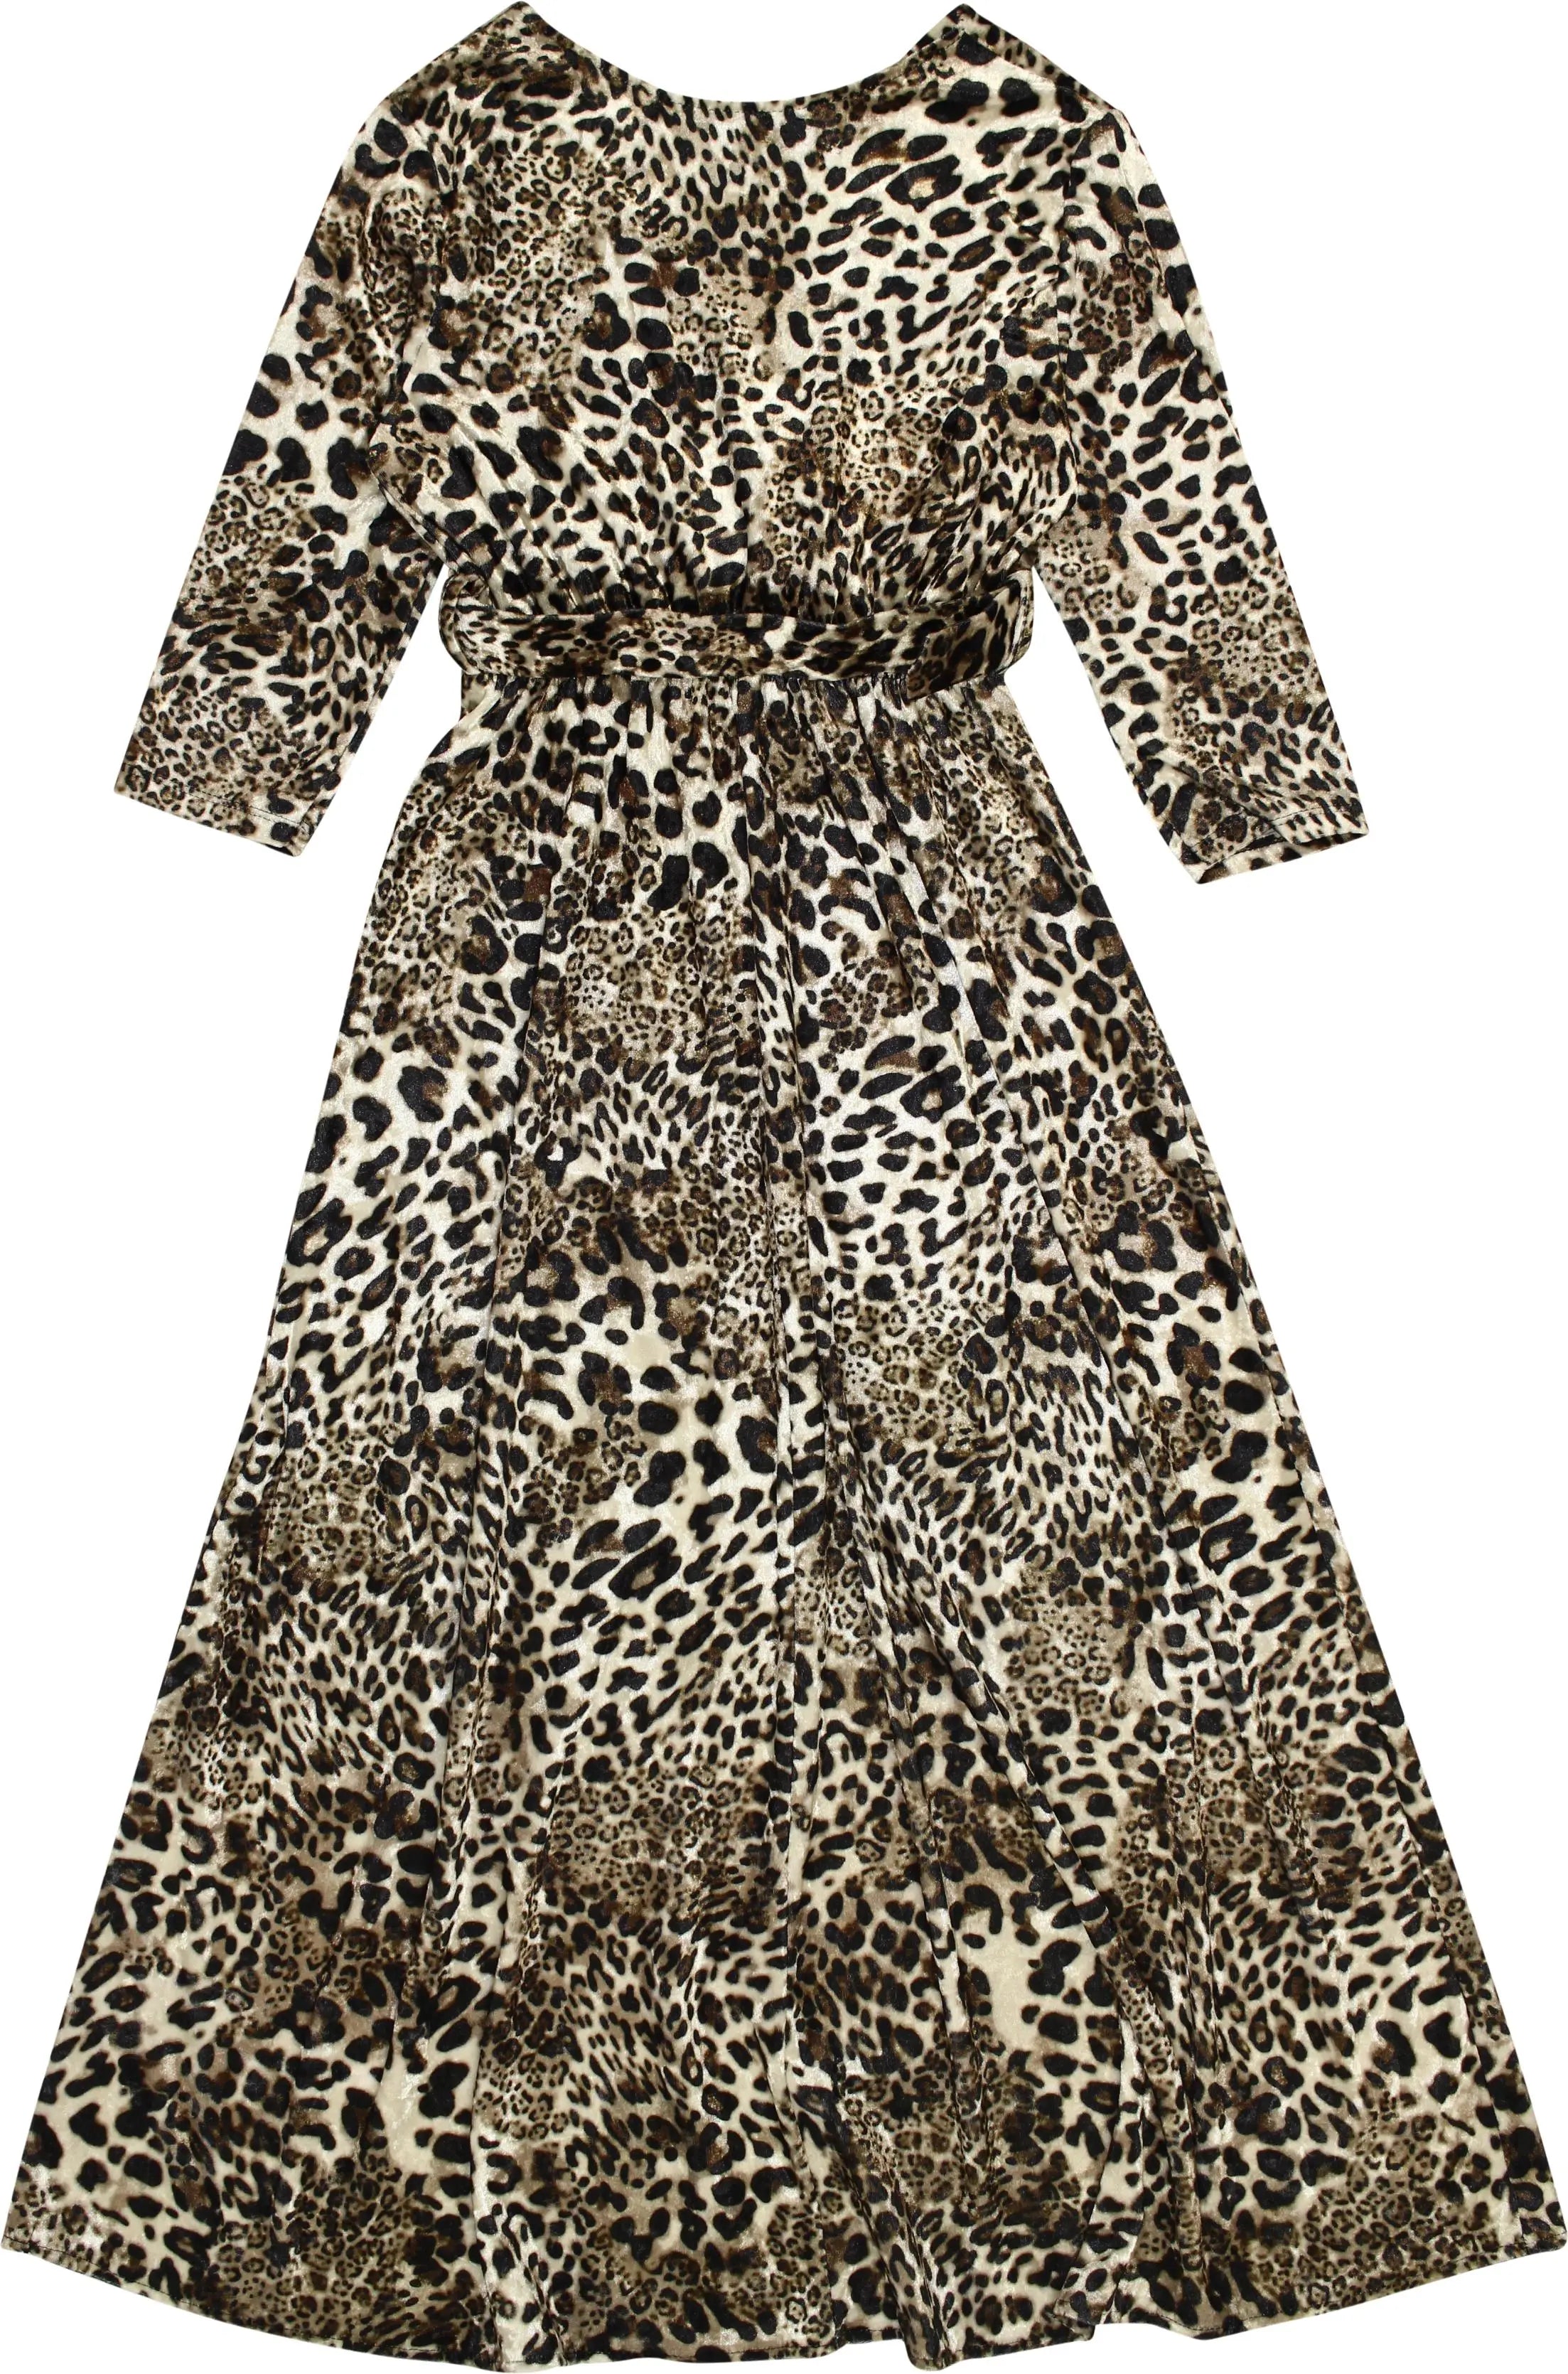 Unknown - Velvet Dress with Animal Print- ThriftTale.com - Vintage and second handclothing